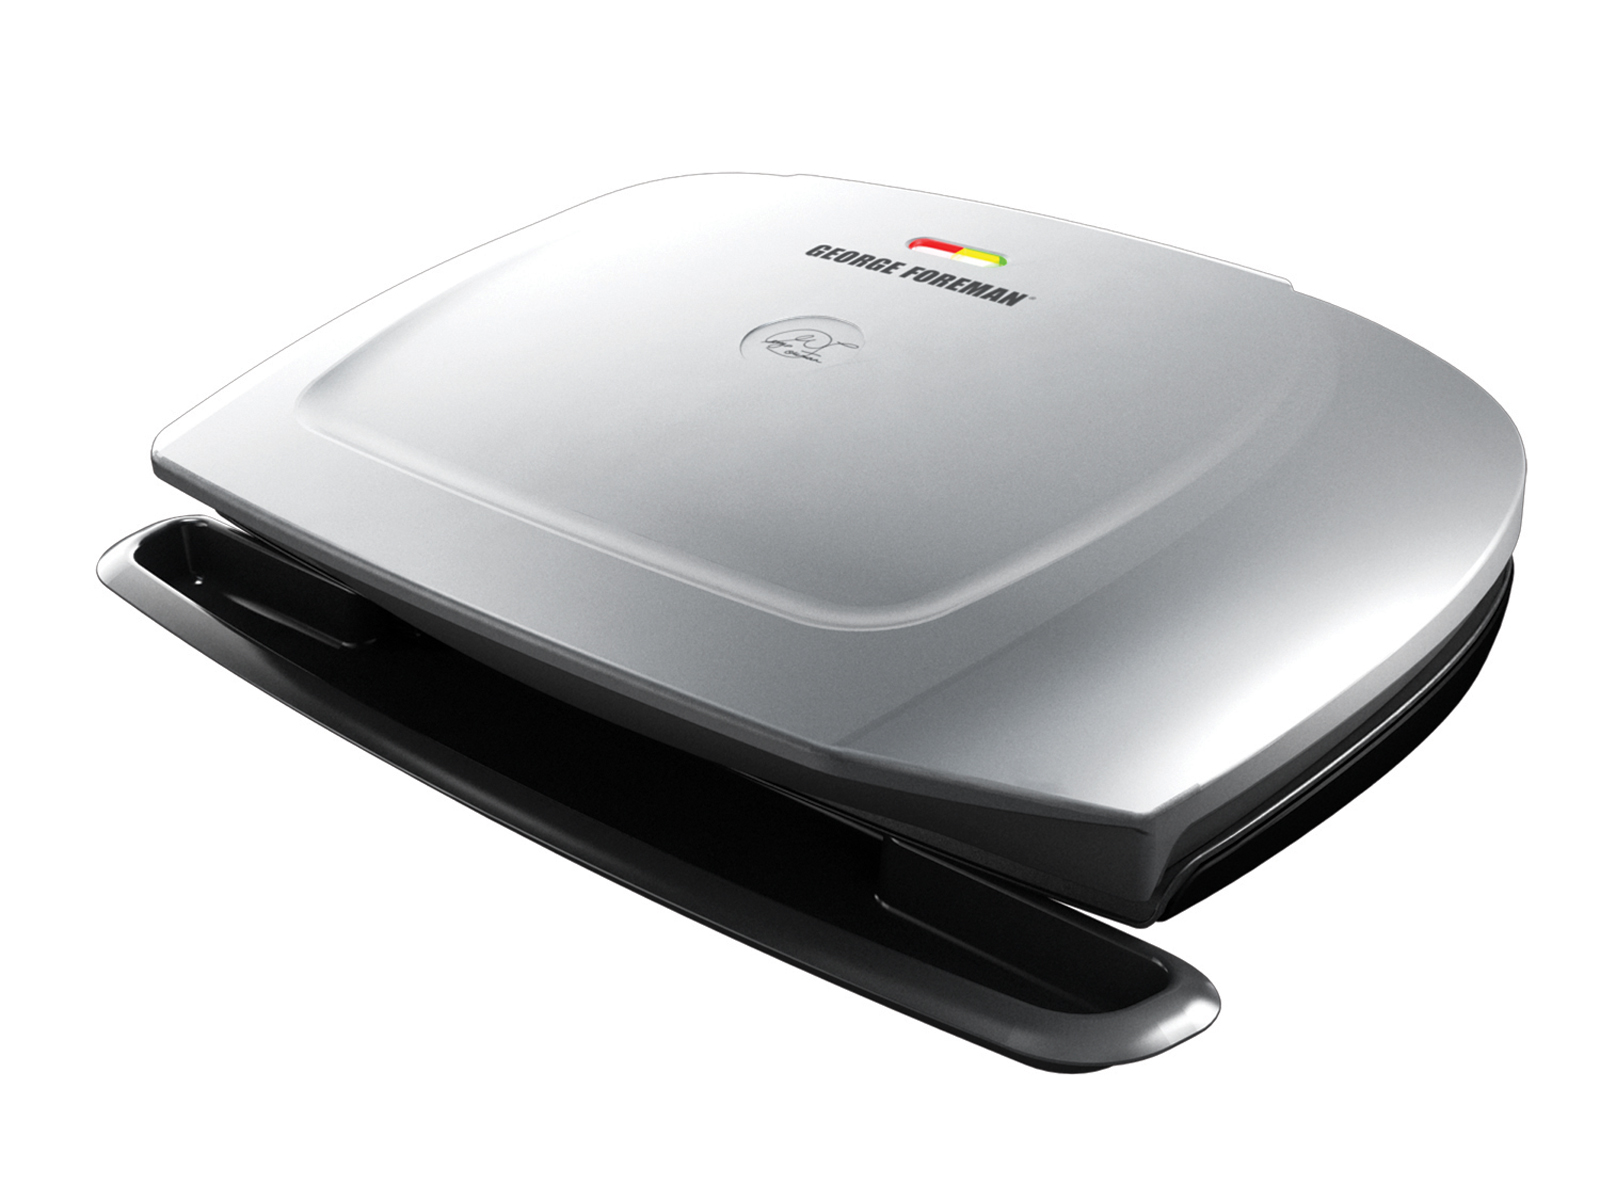 George Foreman GR2144P 9-Serving Classic-Plate Grill